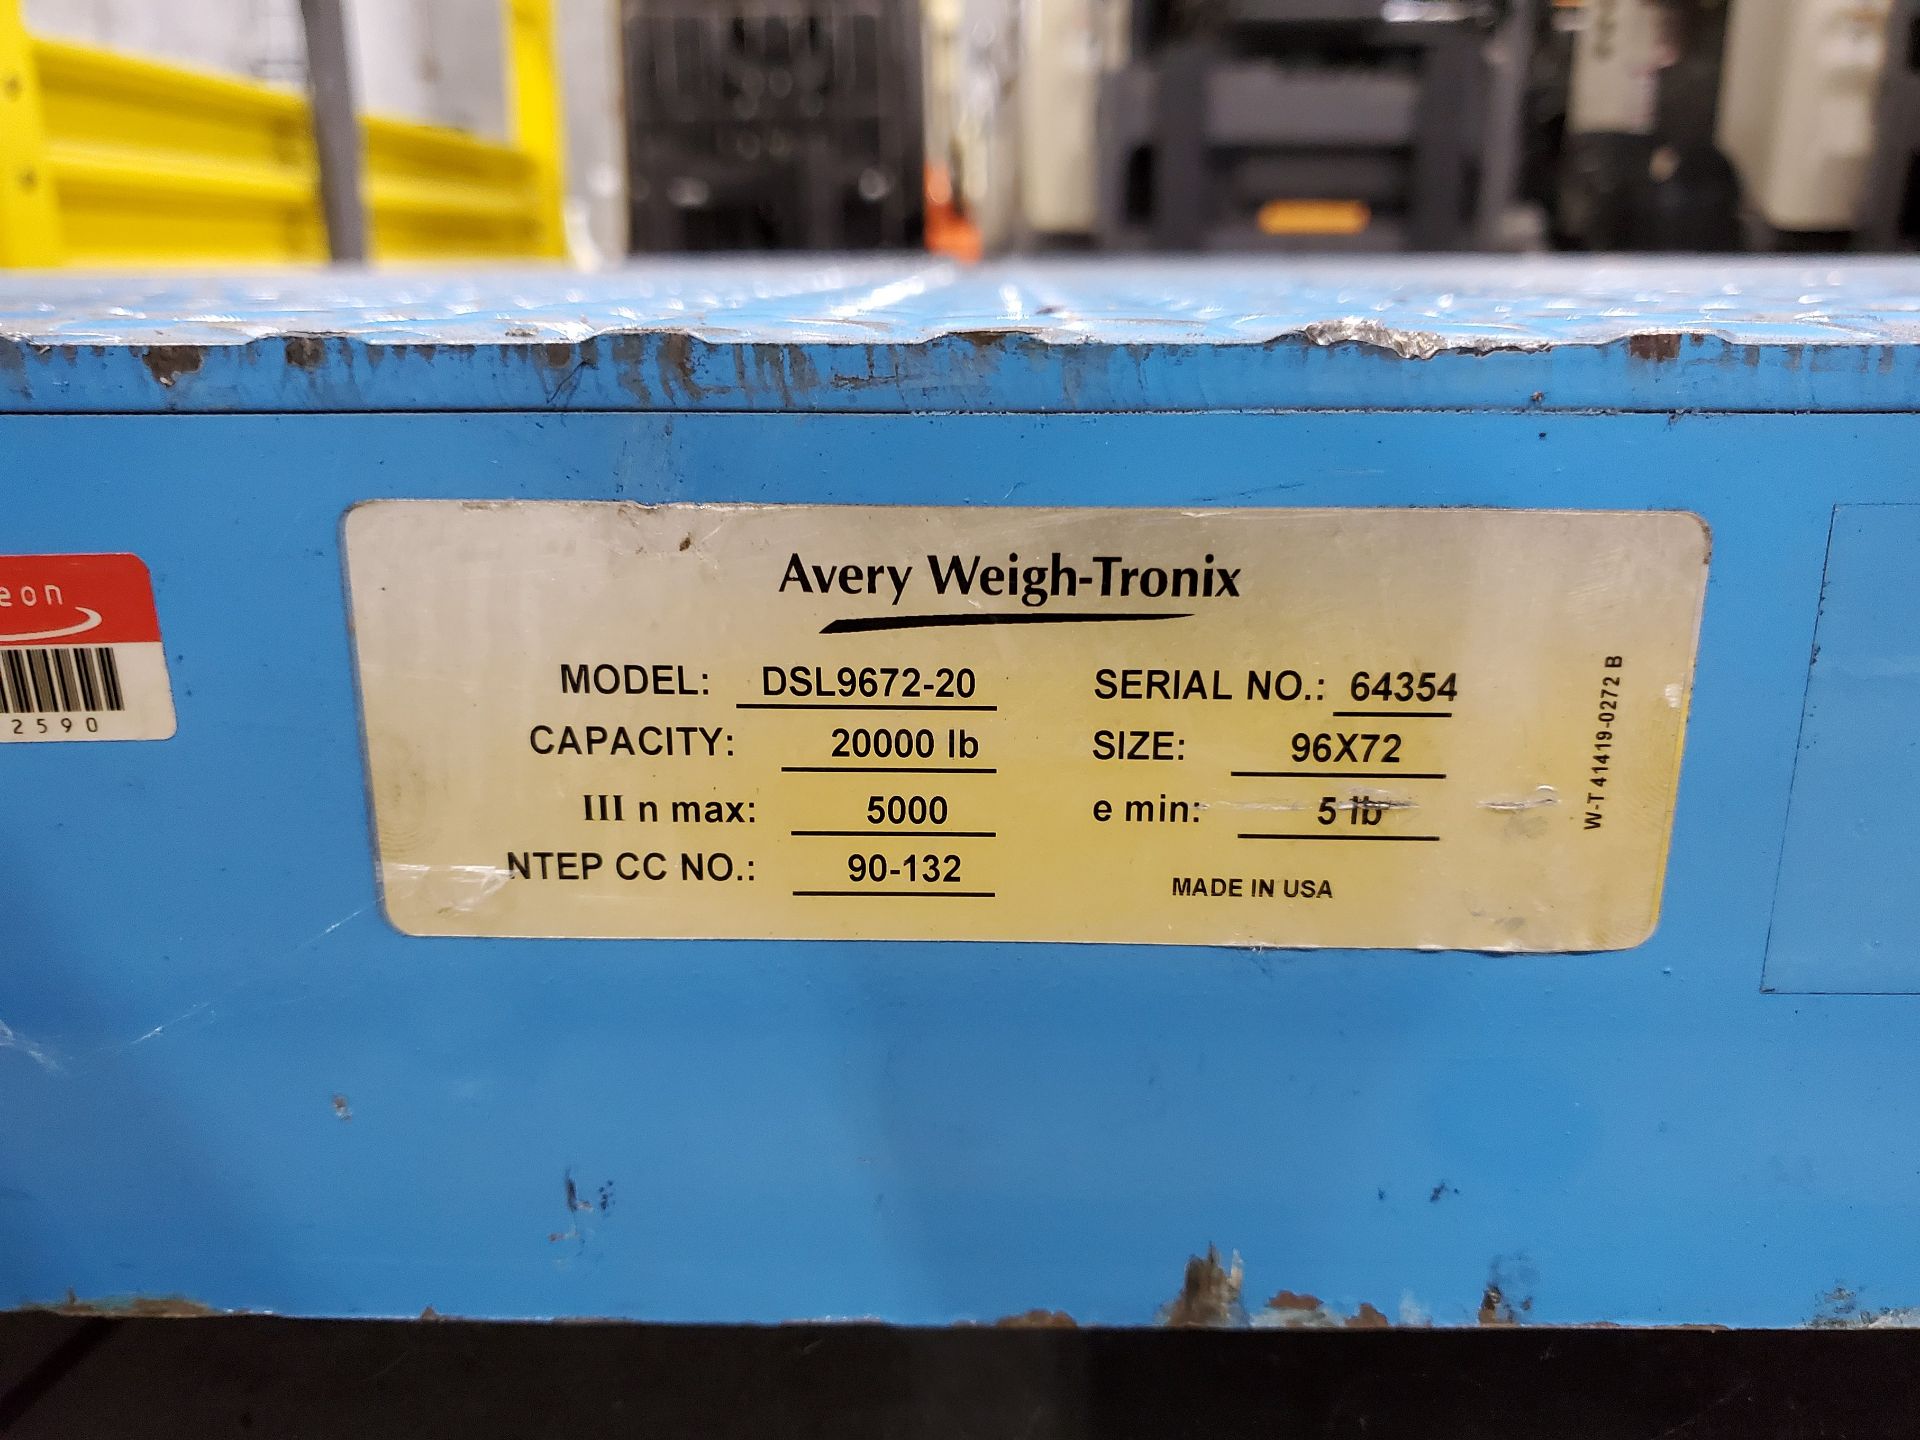 96''X 72'' AVERY WEIGHT-TRONIX DIGITAL FLOOR SCALE WITH METTLER-TOLEDO IND246 DRO UNIT, MODEL - Image 9 of 9